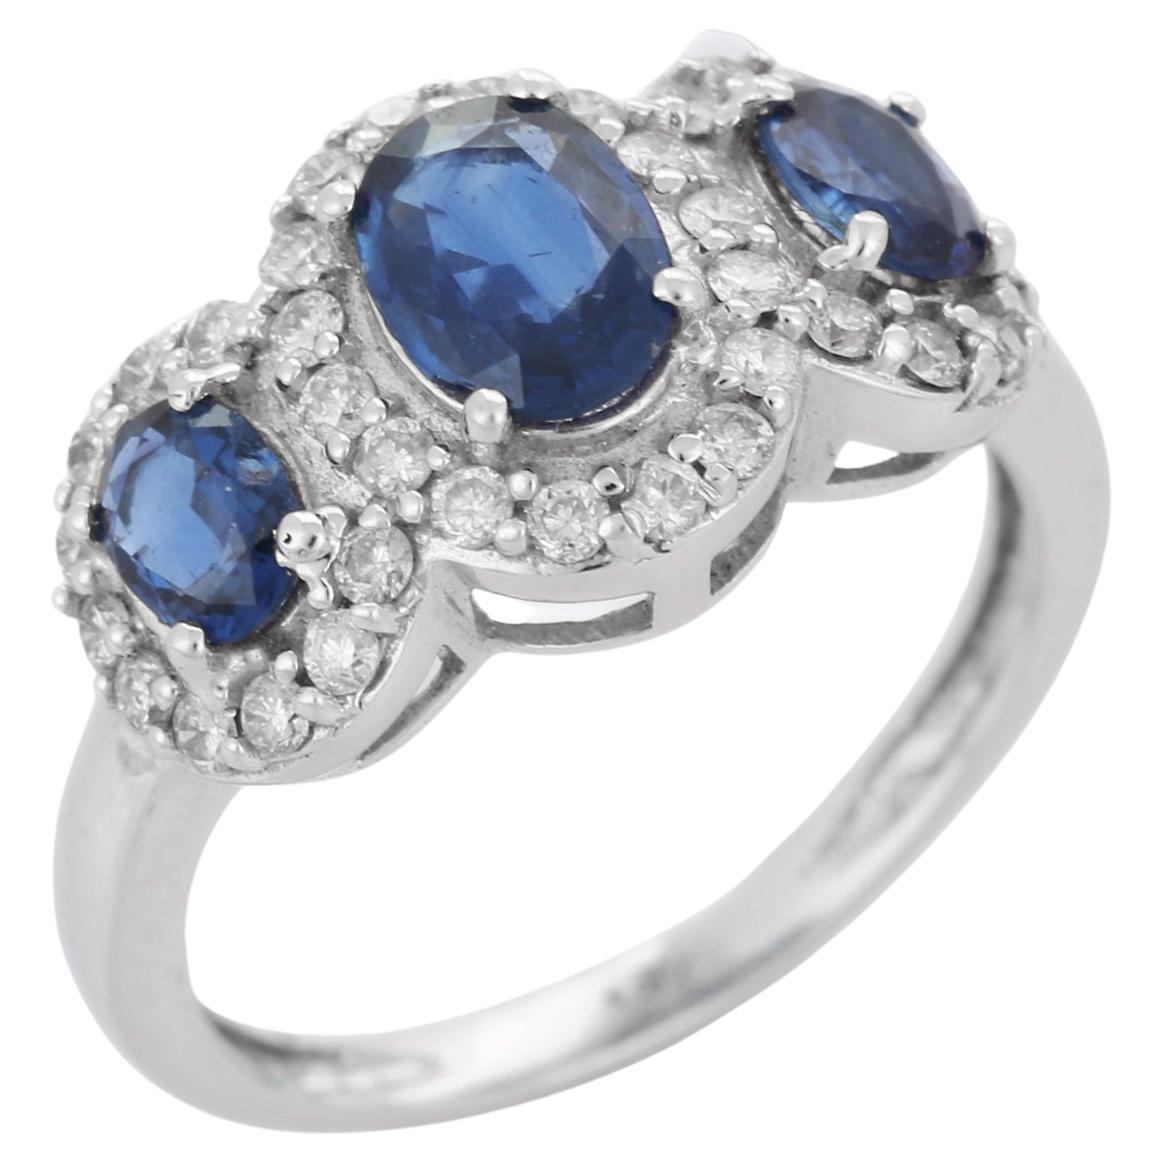 For Sale:  18k Solid White Gold Halo Diamond and Blue Sapphire Three-Stone Engagement Ring